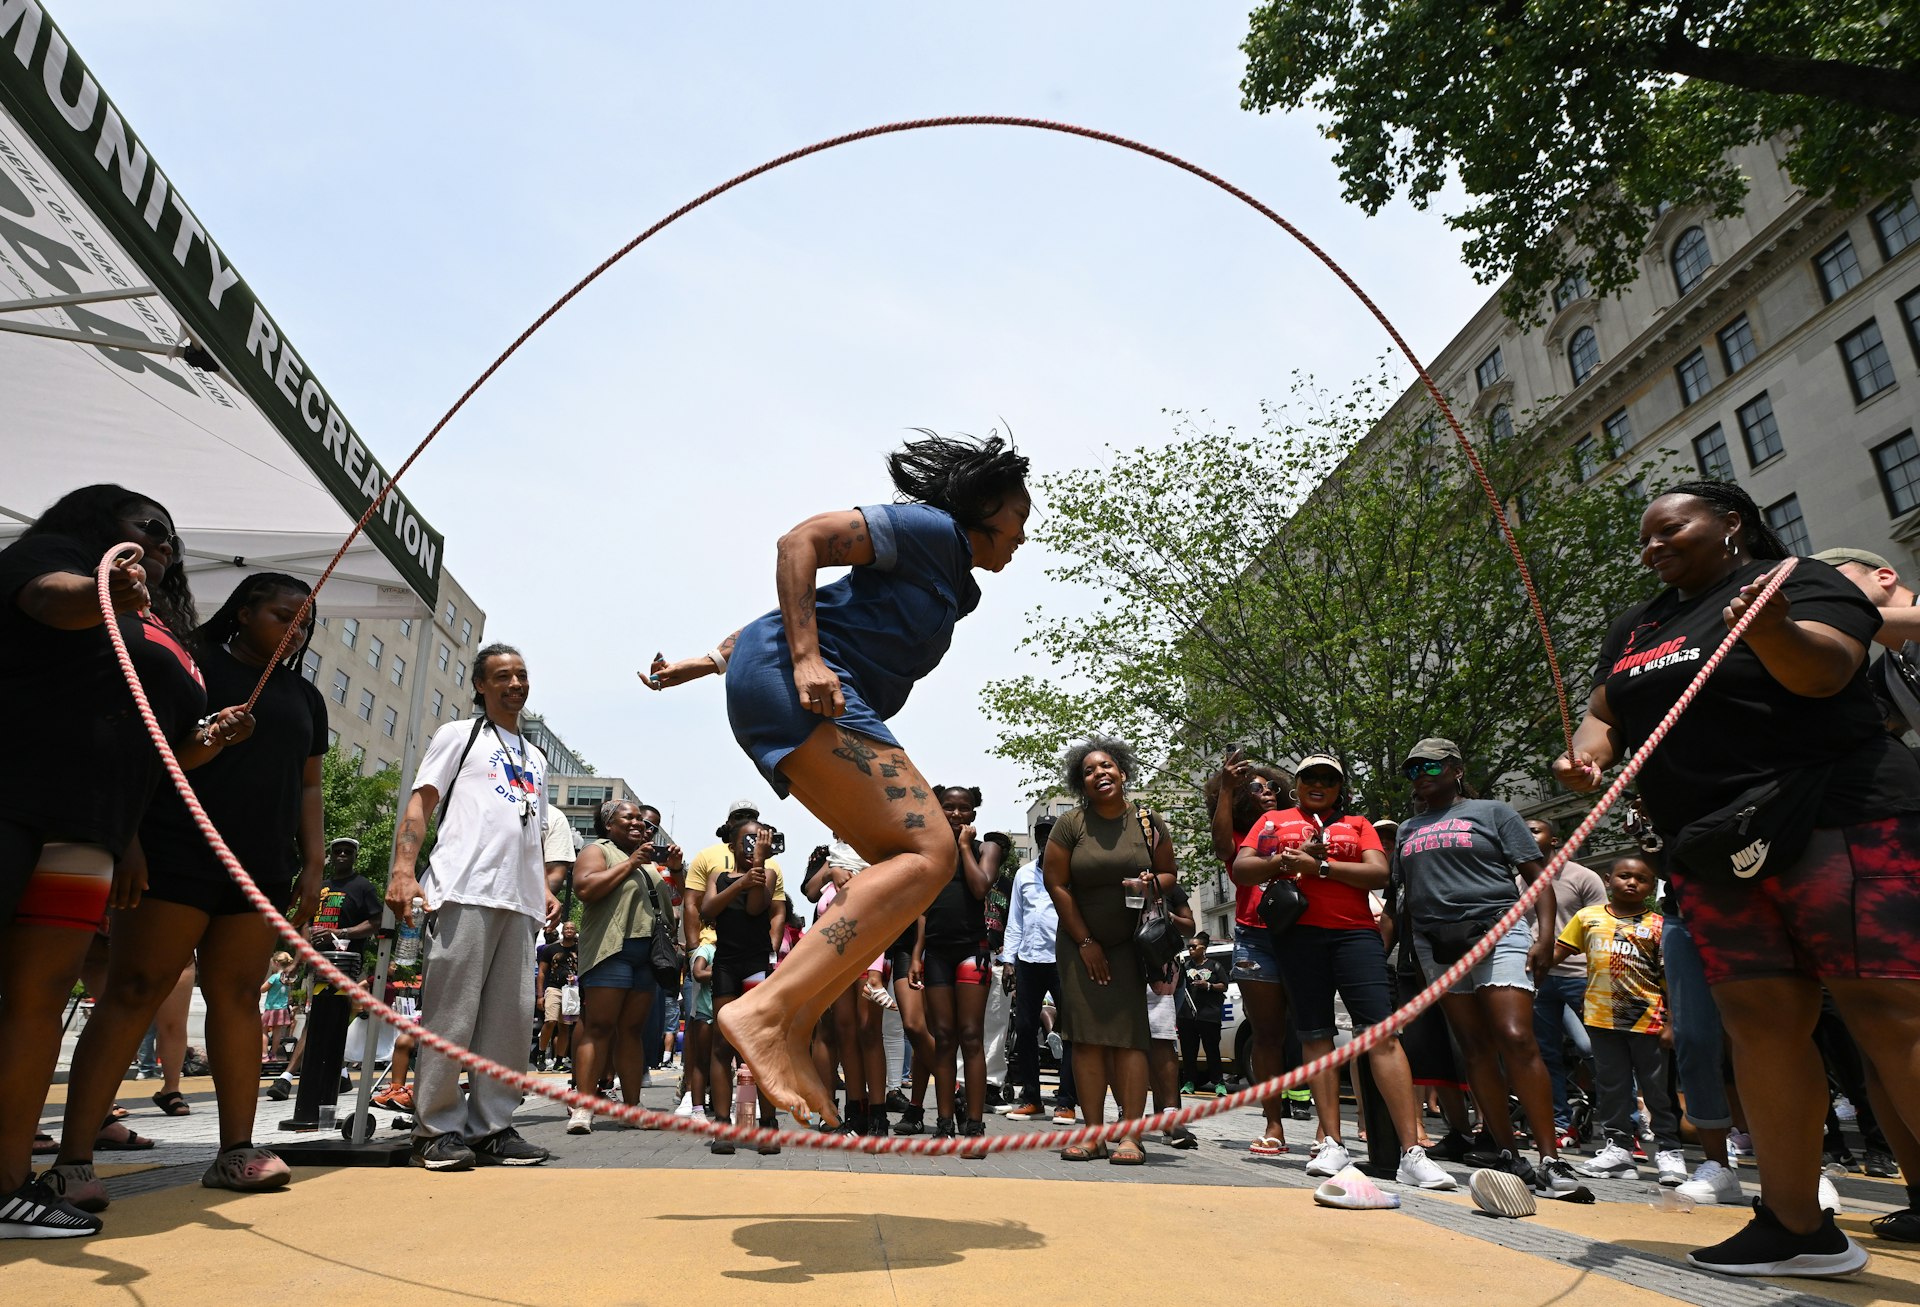 Pasua Turner jumps double dutch as people take part in a Juneteenth event along Black Lives Matter Plaza on Monday June 19, 2023 in Washington, DC.